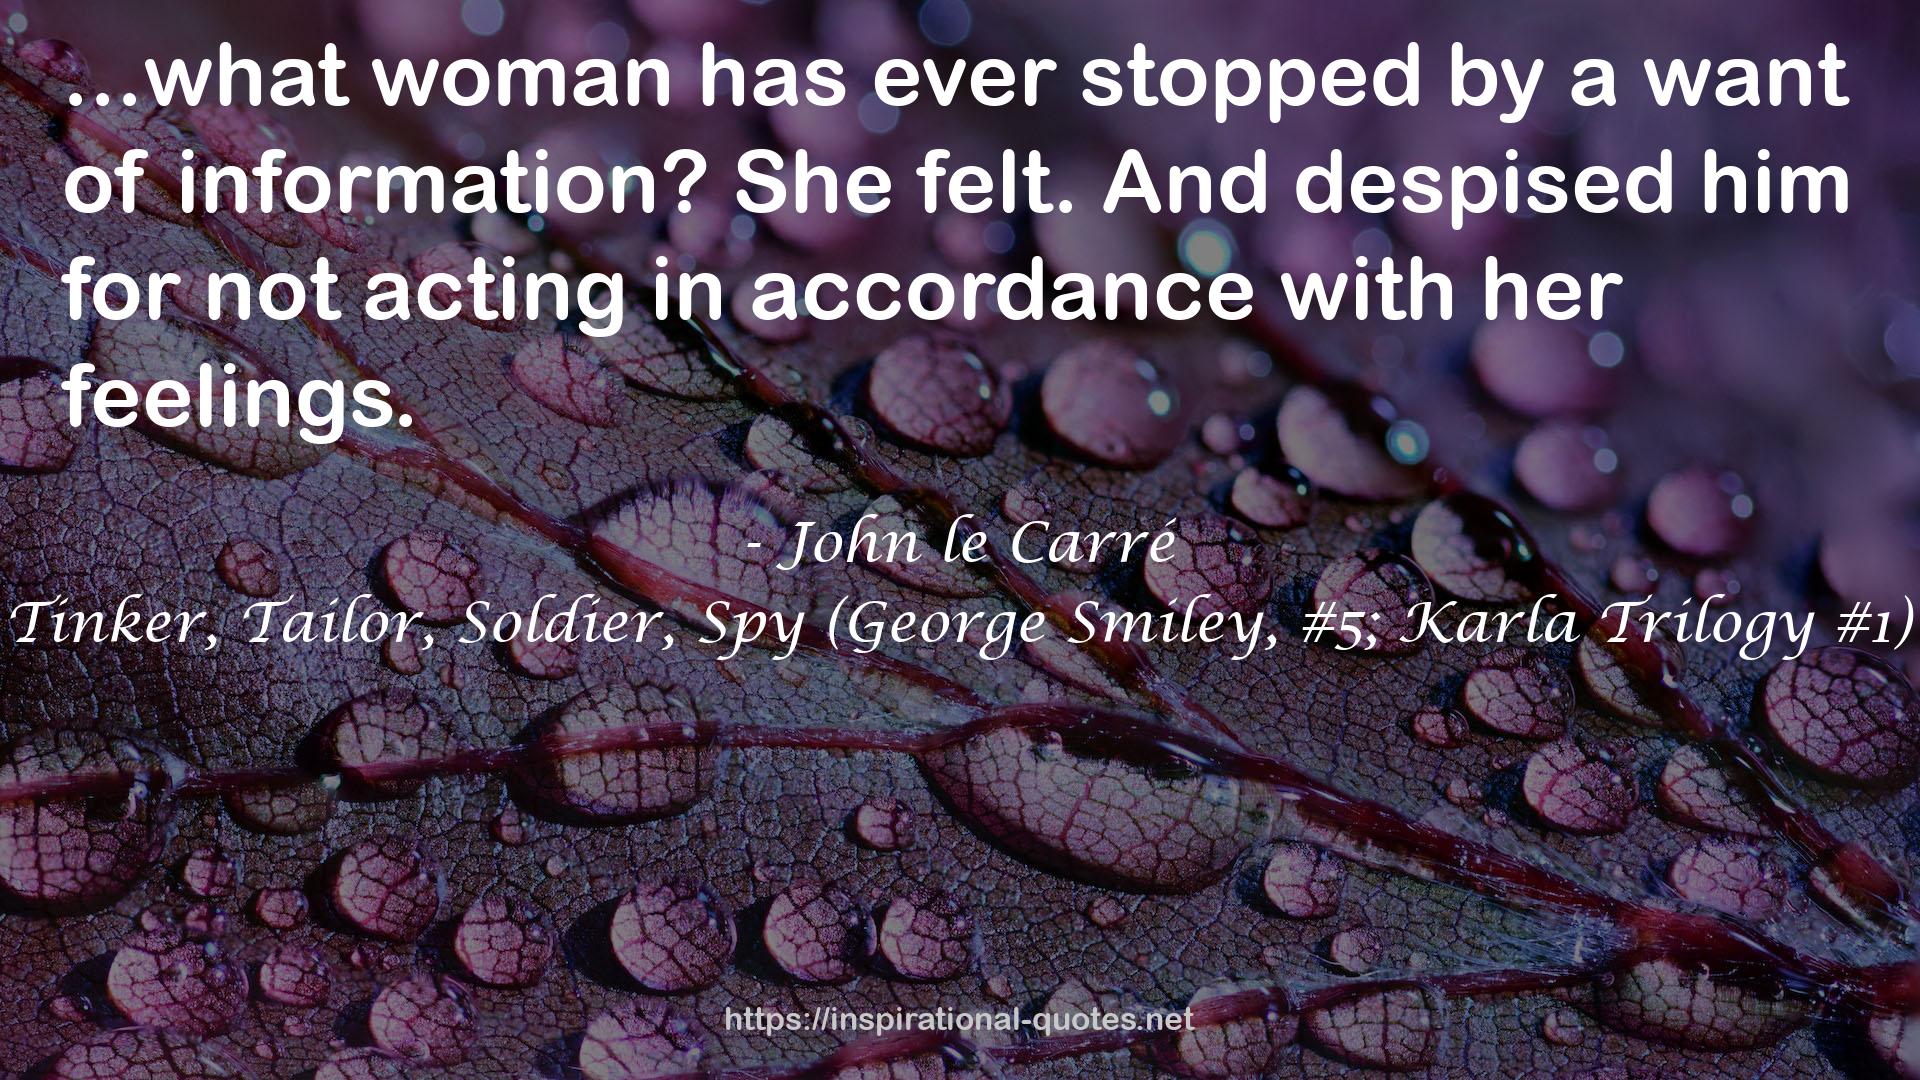 Tinker, Tailor, Soldier, Spy (George Smiley, #5; Karla Trilogy #1) QUOTES